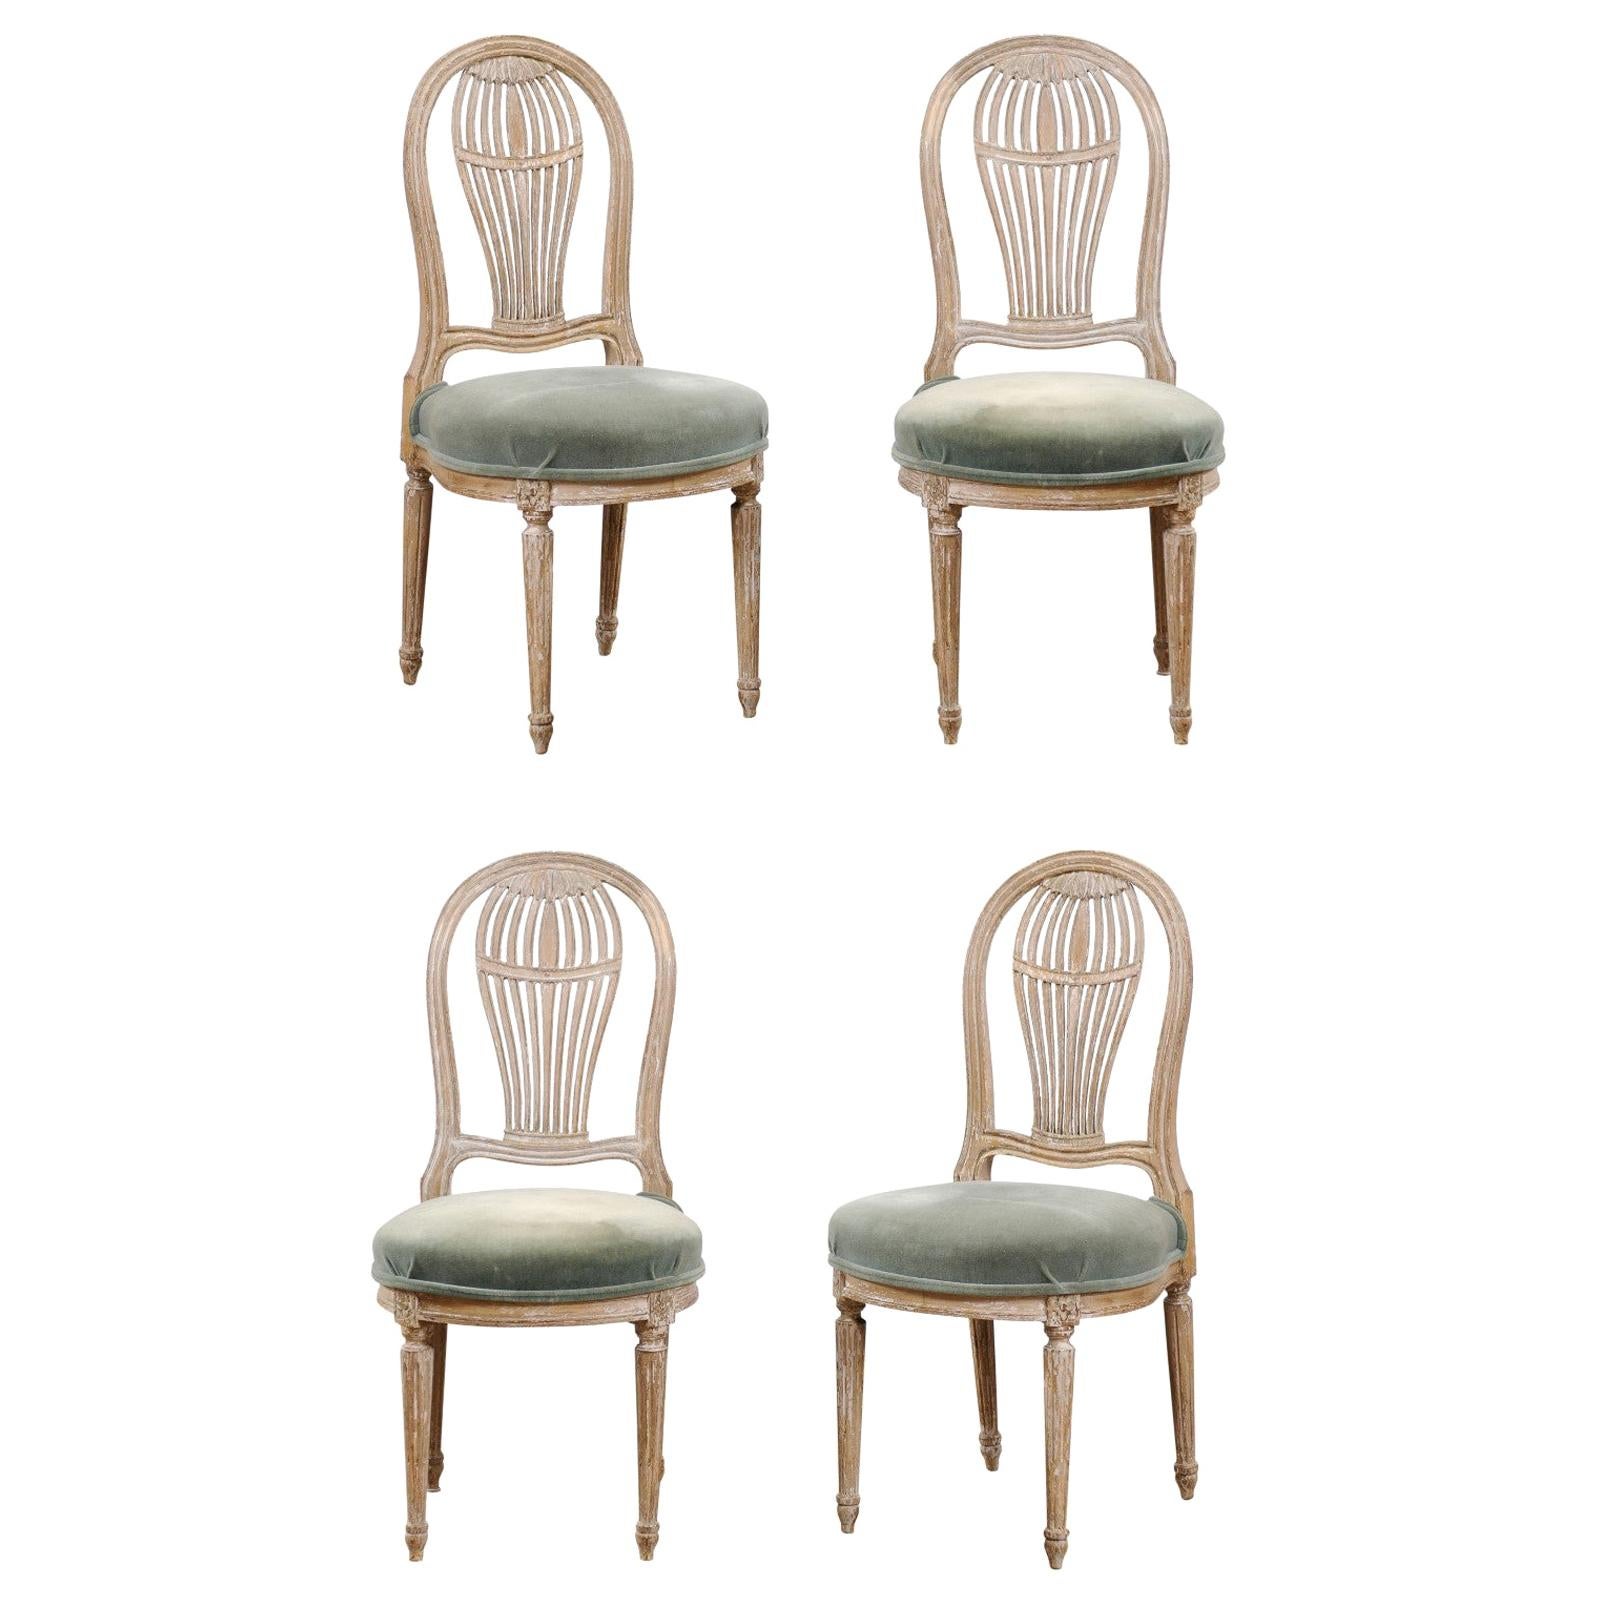 French Set of 4 Pierce-Carved Balloon-Back Side Chairs, Jansen-Style